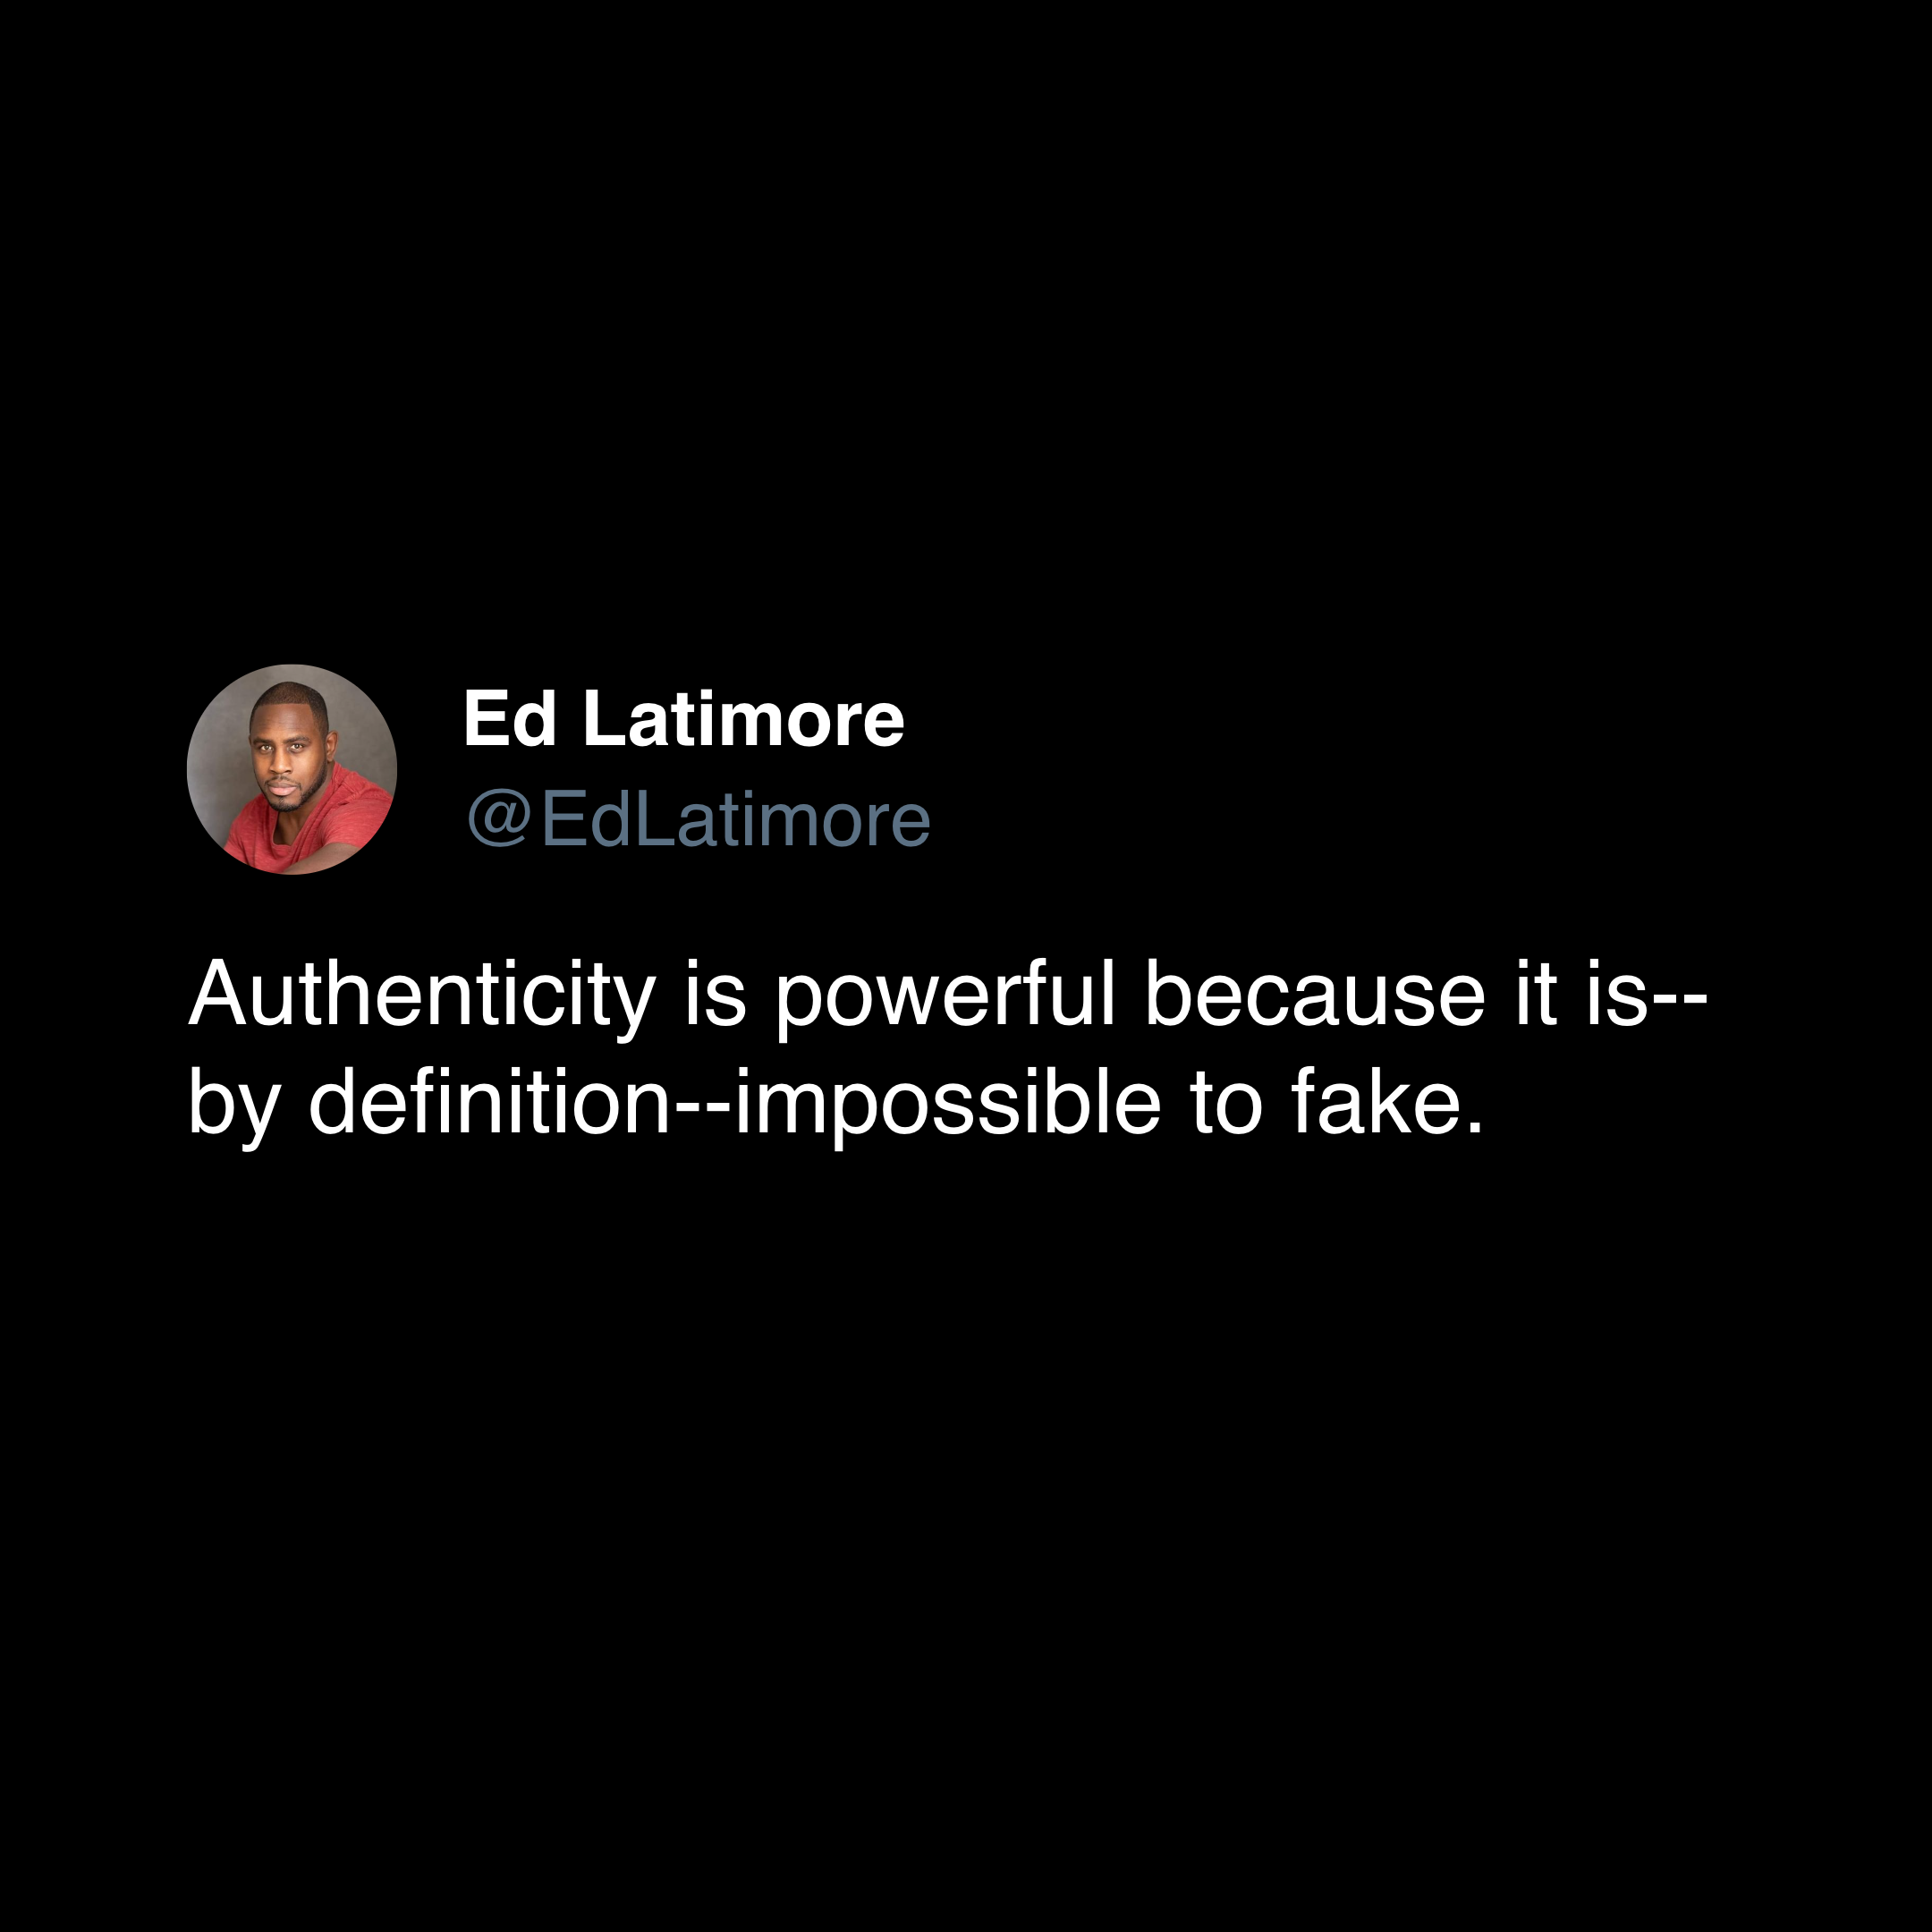 ed latimore authenticity quote "authenticity is impossible to fake"